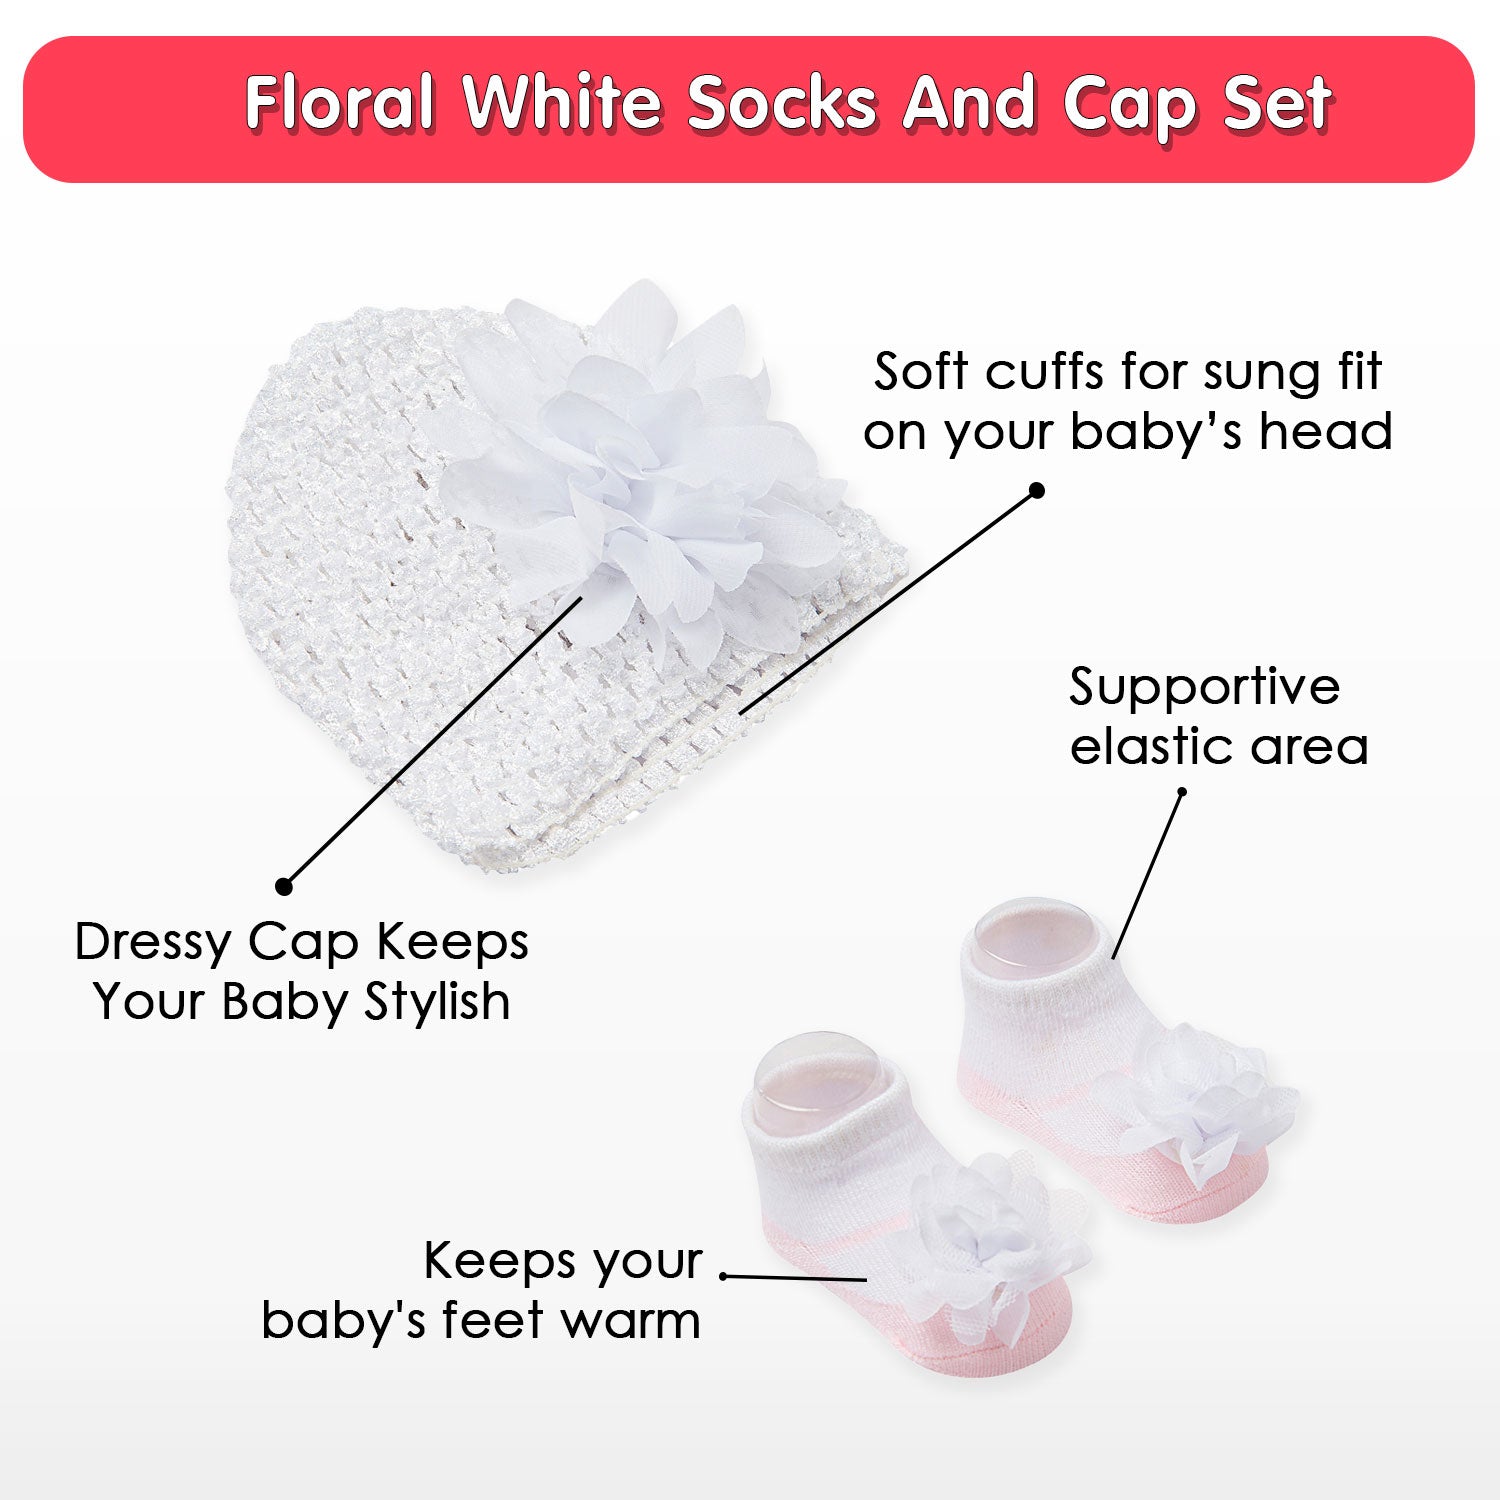 Floral White Socks And Cap Set